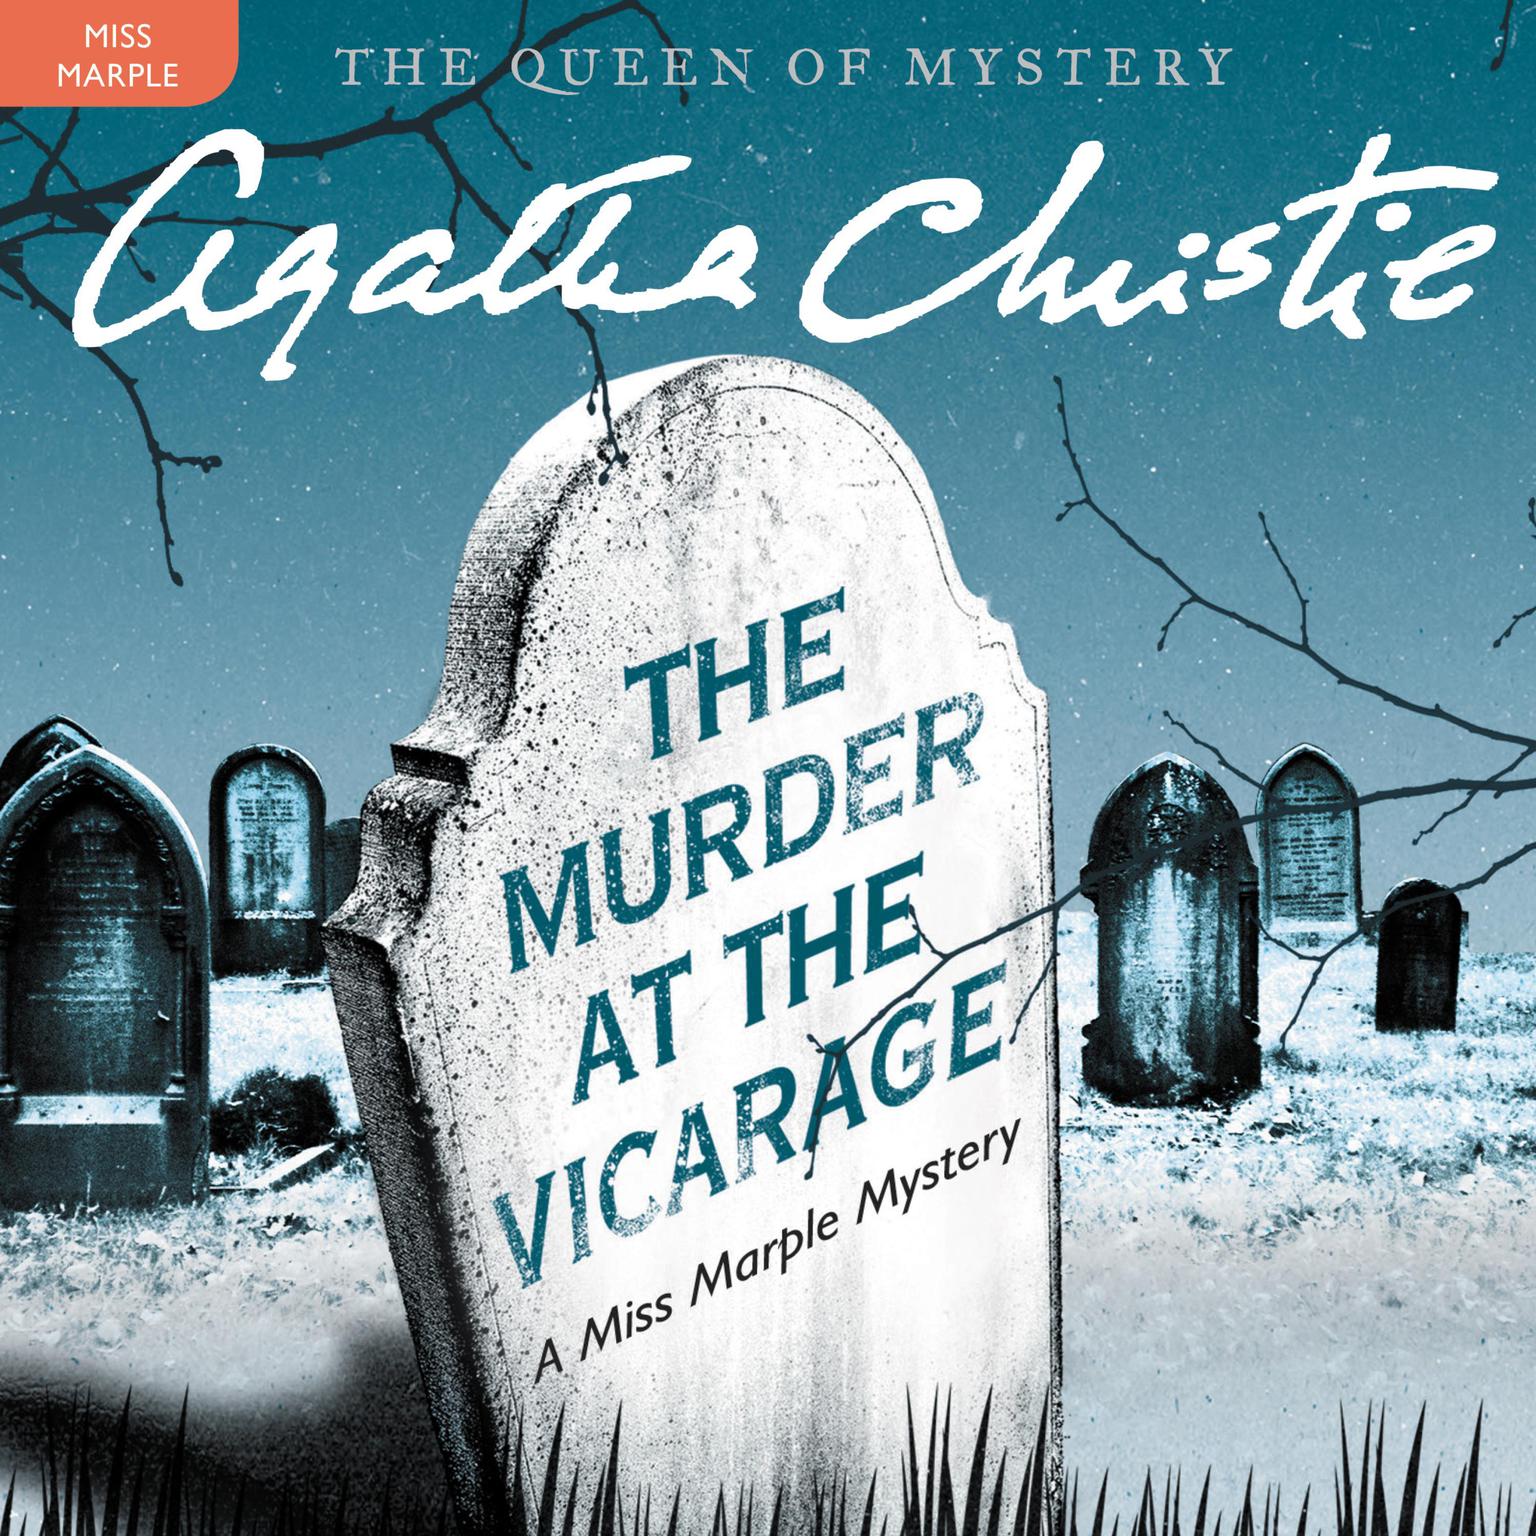 The Murder at the Vicarage: A Miss Marple Mystery Audiobook, by Agatha Christie